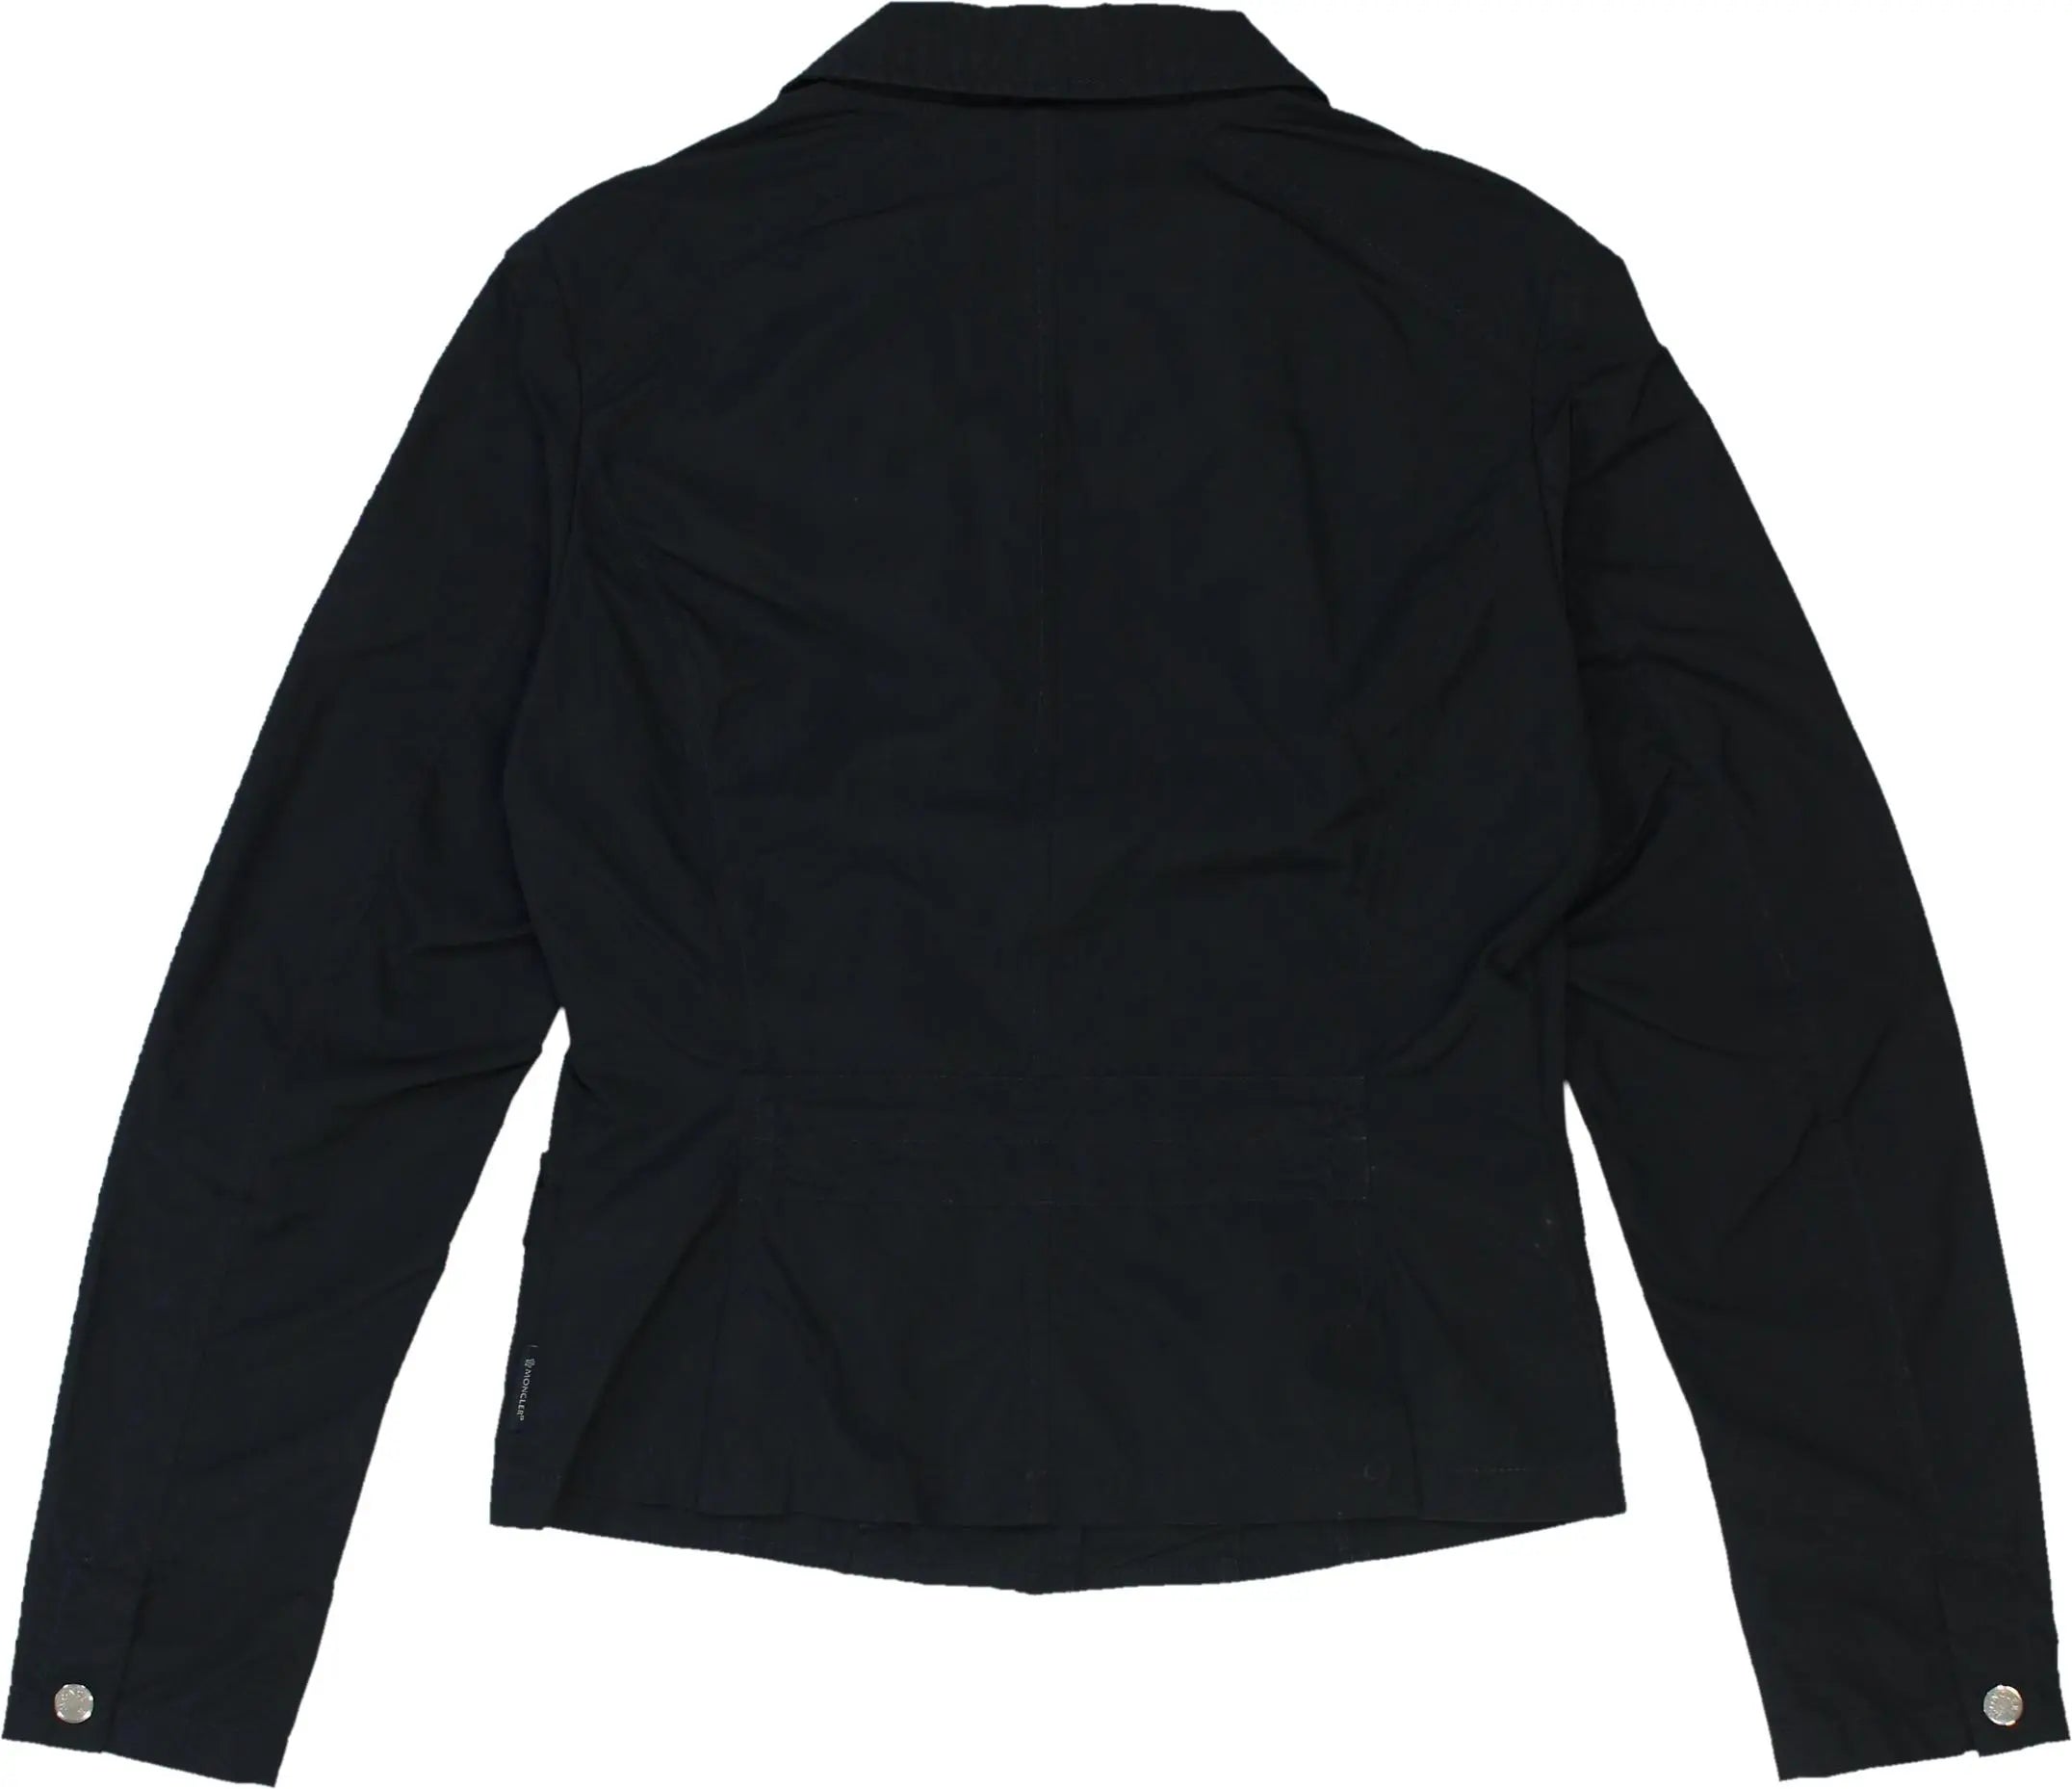 Moncler - Black Jacket by Moncler- ThriftTale.com - Vintage and second handclothing